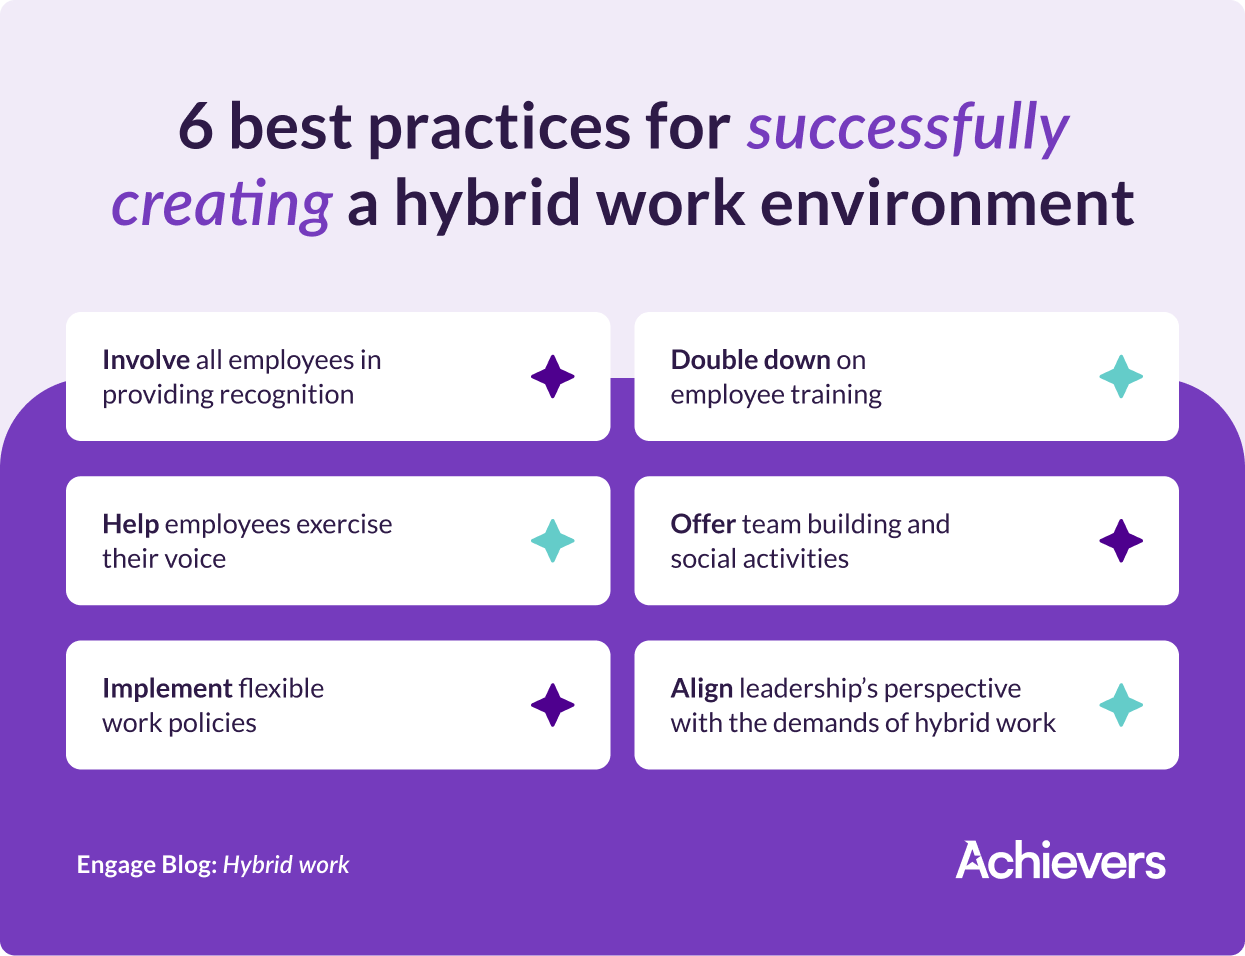 6 best practices for successfully creating a hybrid work environment